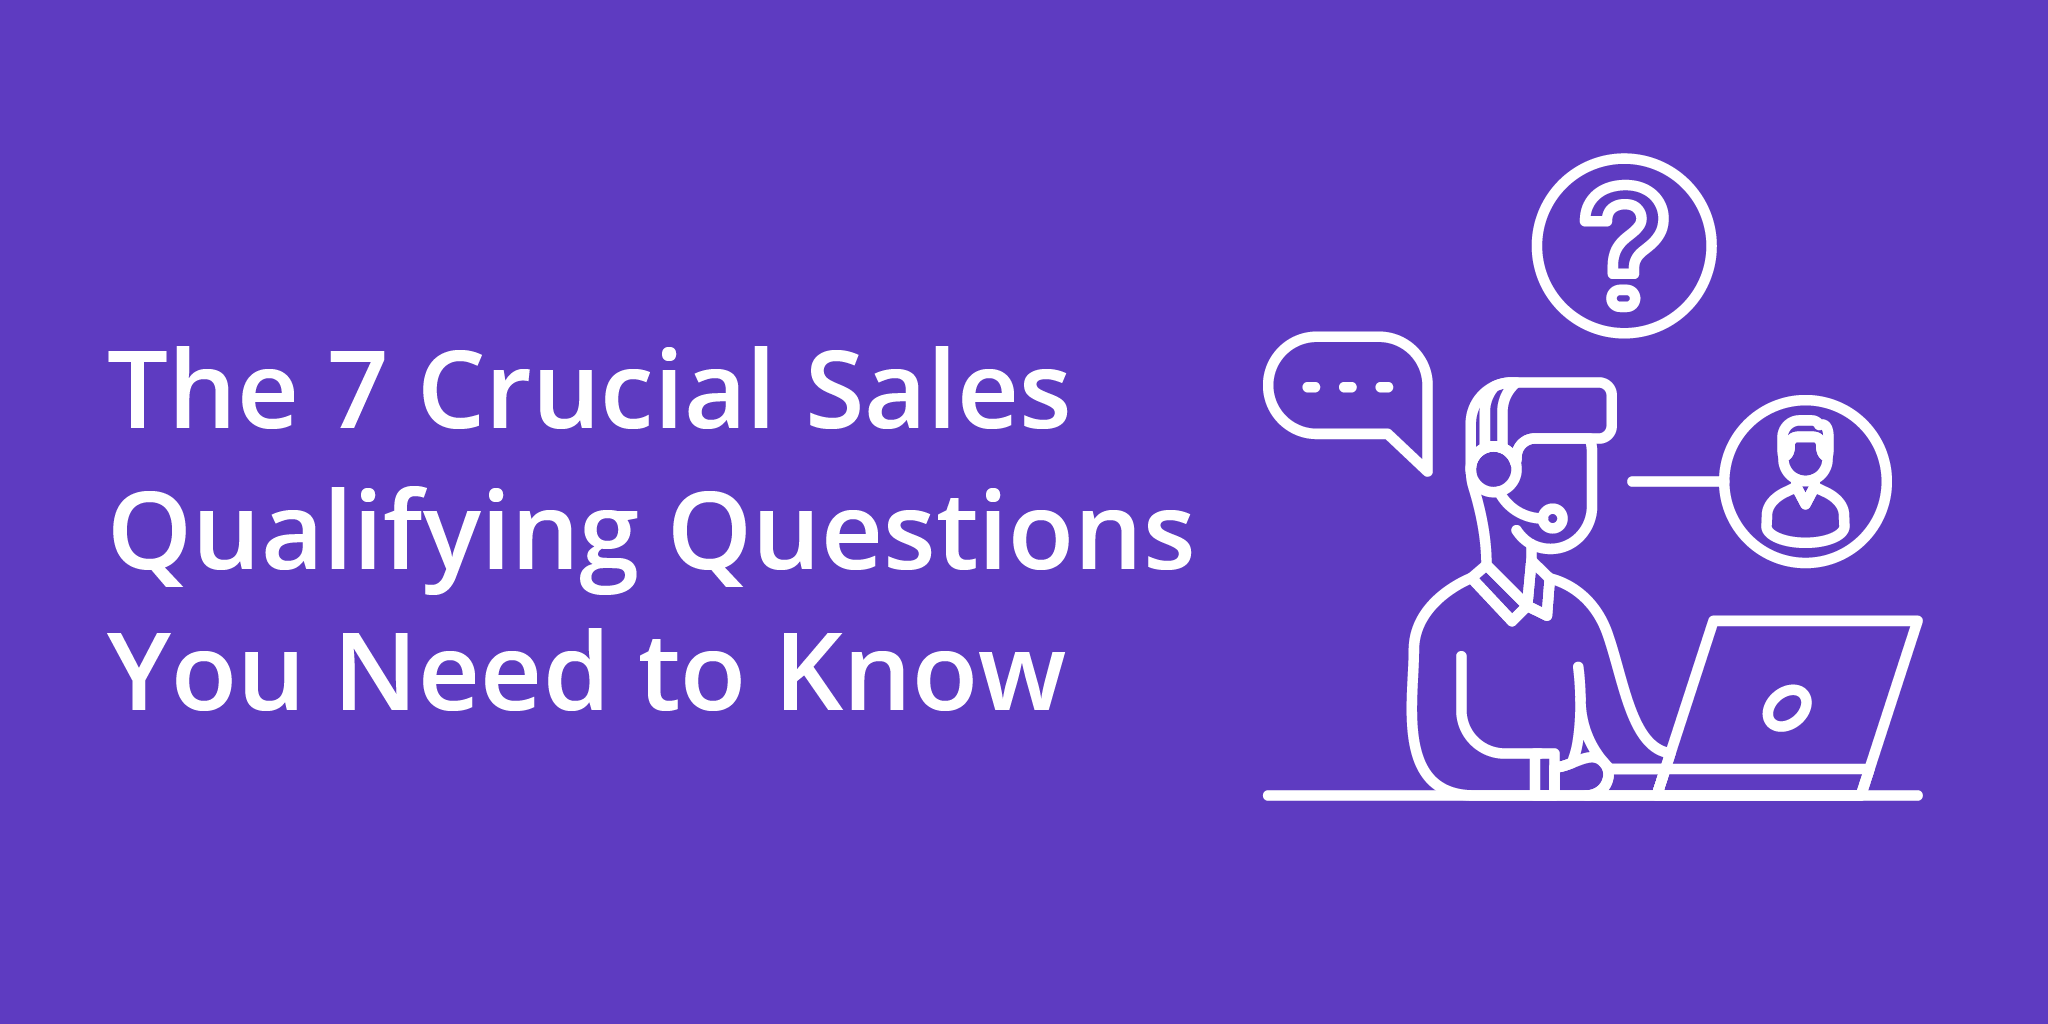 the-7-crucial-sales-qualifying-questions-you-need-to-know